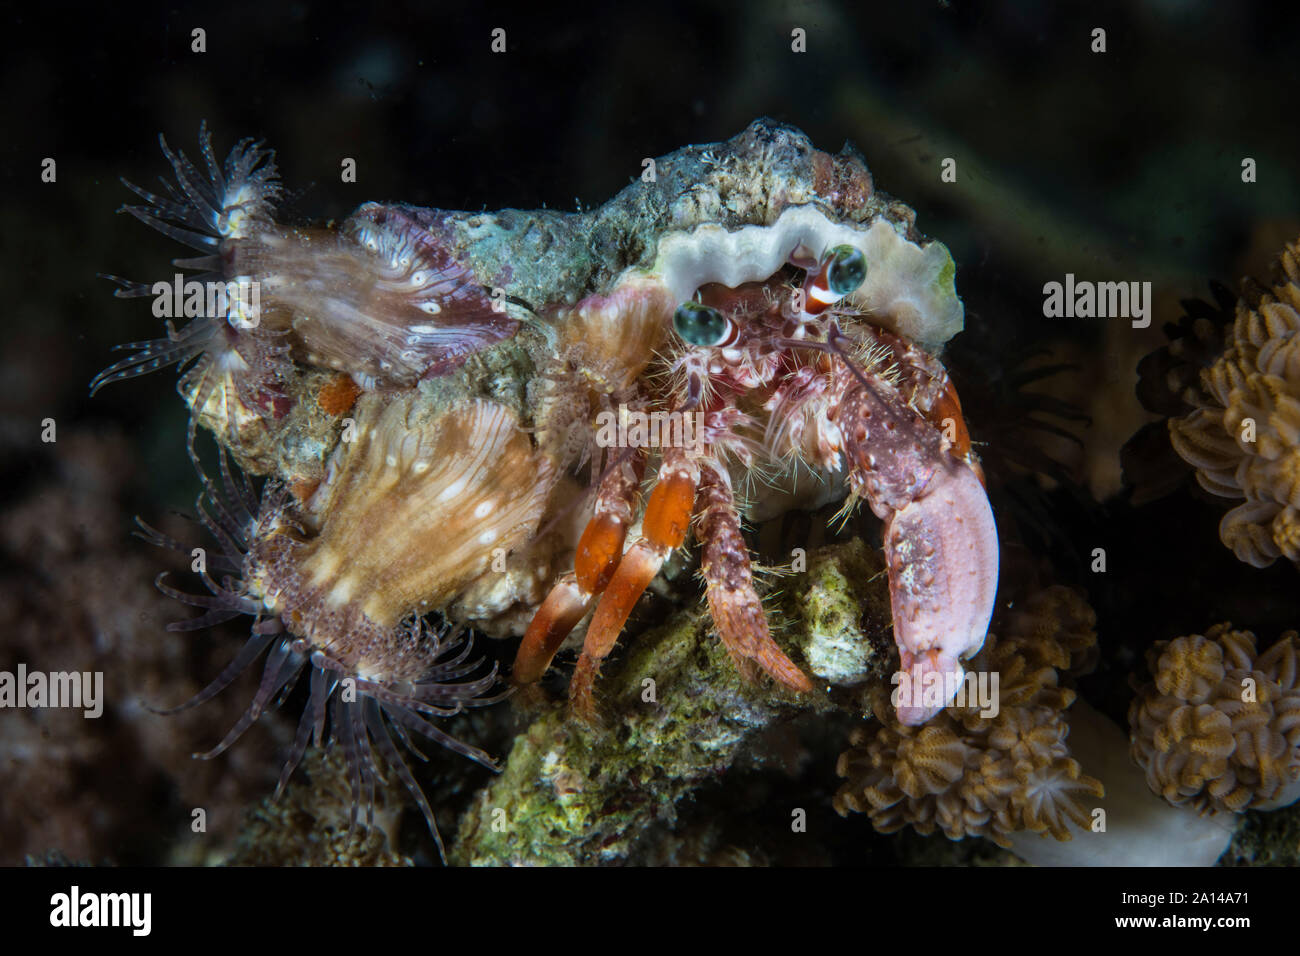 Symbiotic anemones cover the shell of a hermit crab. Stock Photo